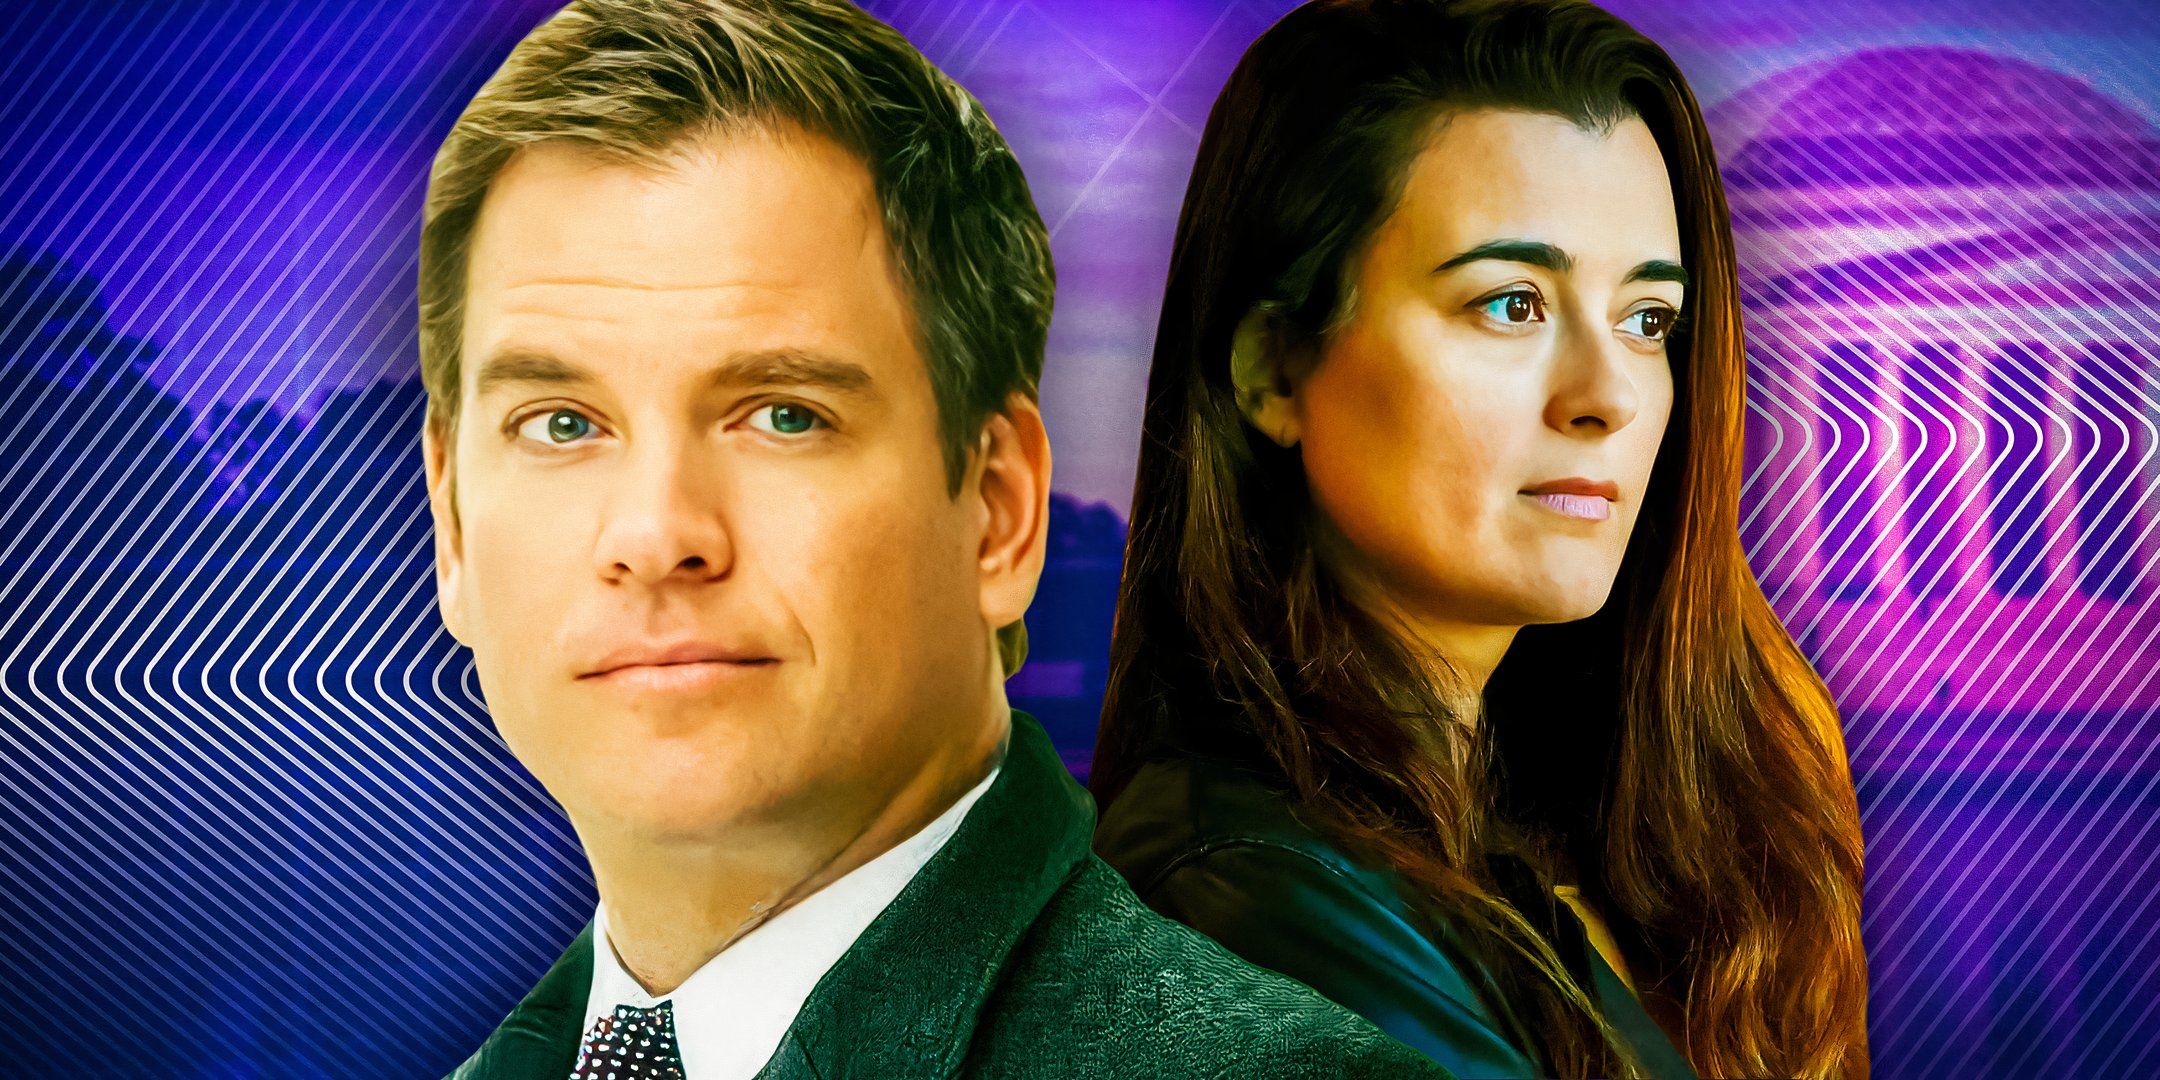 Michael Weatherly as Tony and Cote de Pablo as Ziva from NCIS